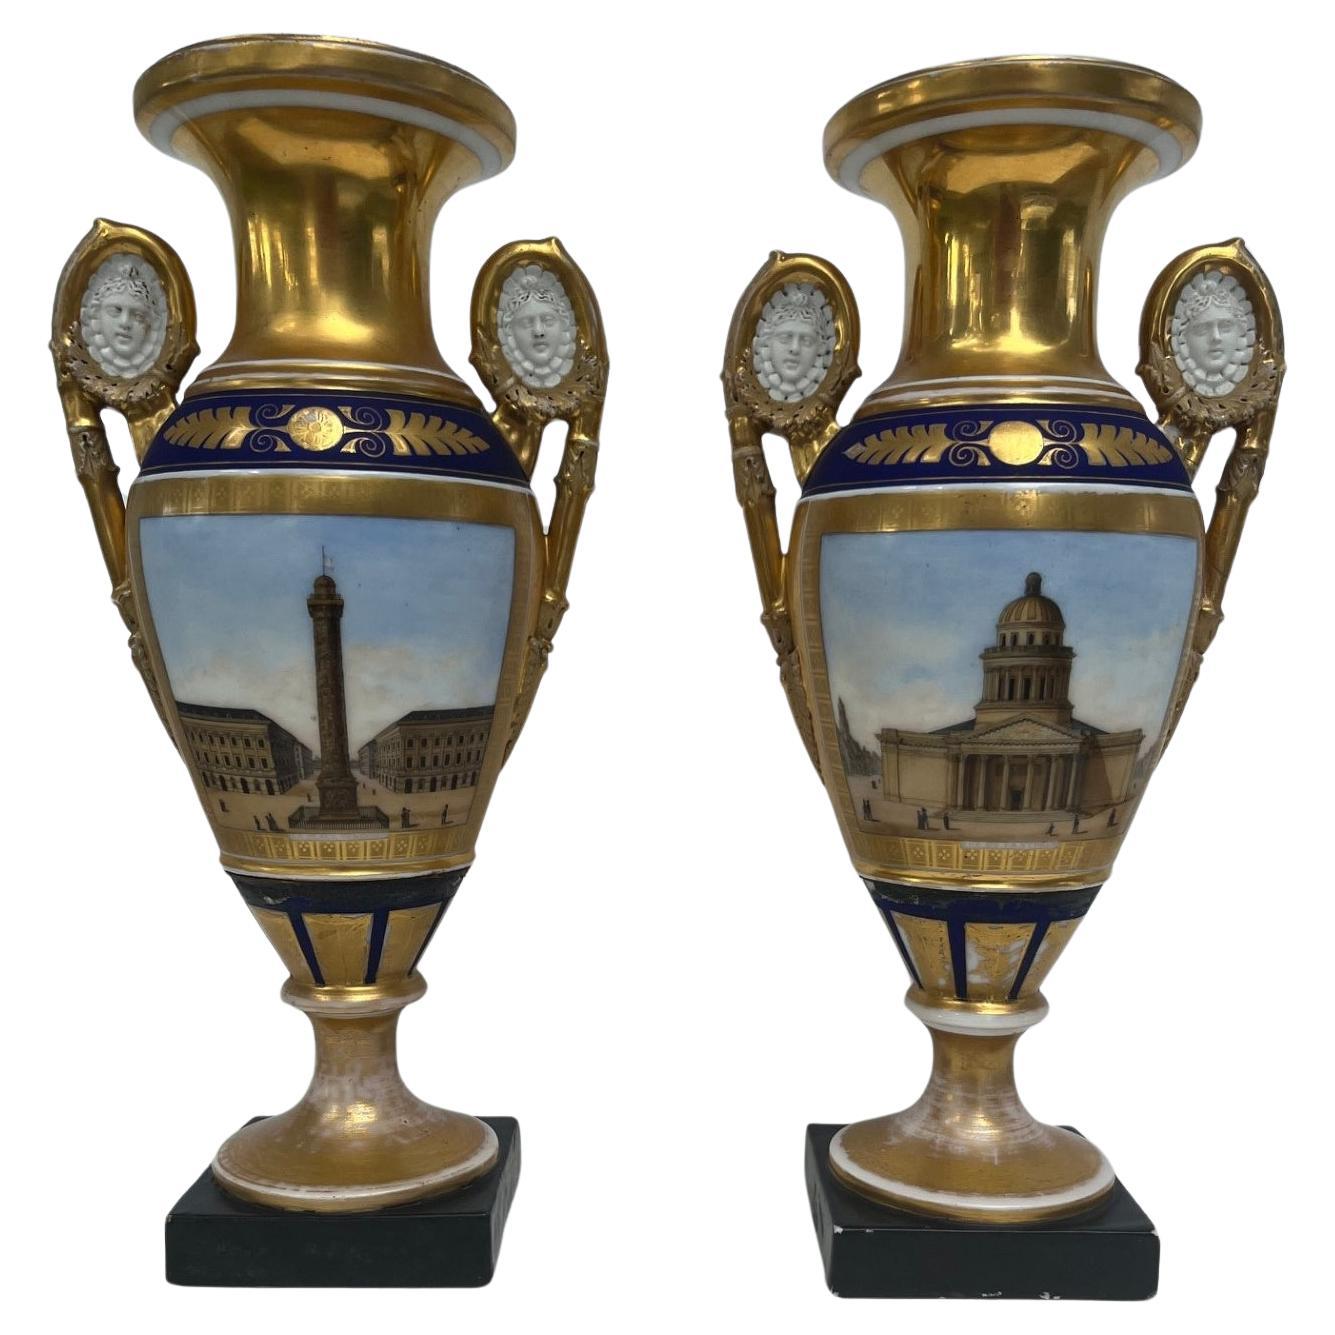 19th Century Pair of Paris Two Handled Vases in Gold and Cobalt Blue.